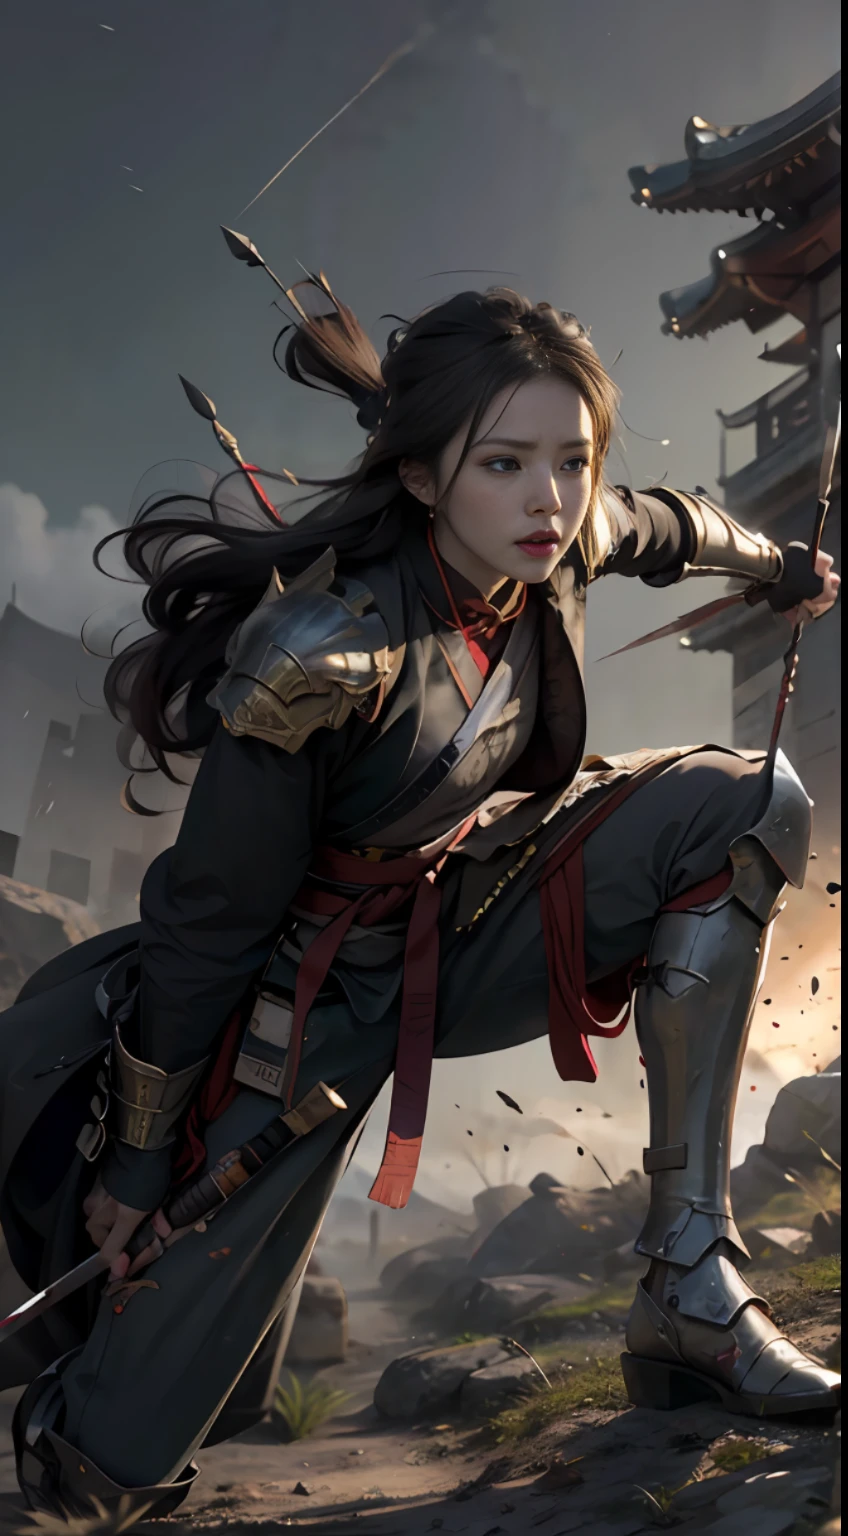 (Positive Focus), (In the Dark: 1), (Best Quality), (Realisticity: 1), Realistic Skin Texture, Highly Detailed, 8k Wallpaper, Volume Lighting, Dynamic Lighting, A Girl, Black Robe, Red Belt, Small Amount of Armor, Shoulder Armor, Waist Guard, Hand Guard, Ancient Chinese Wind, Escape Action, Run, Flee, Be Chased, Short Sword at the Waist Position, Half-Squat Attack Stance, Bloodstain, Broken Clothes, Ancient Chinese Battlefield, Arrows Flying, War, Night, Dramatic Composition,